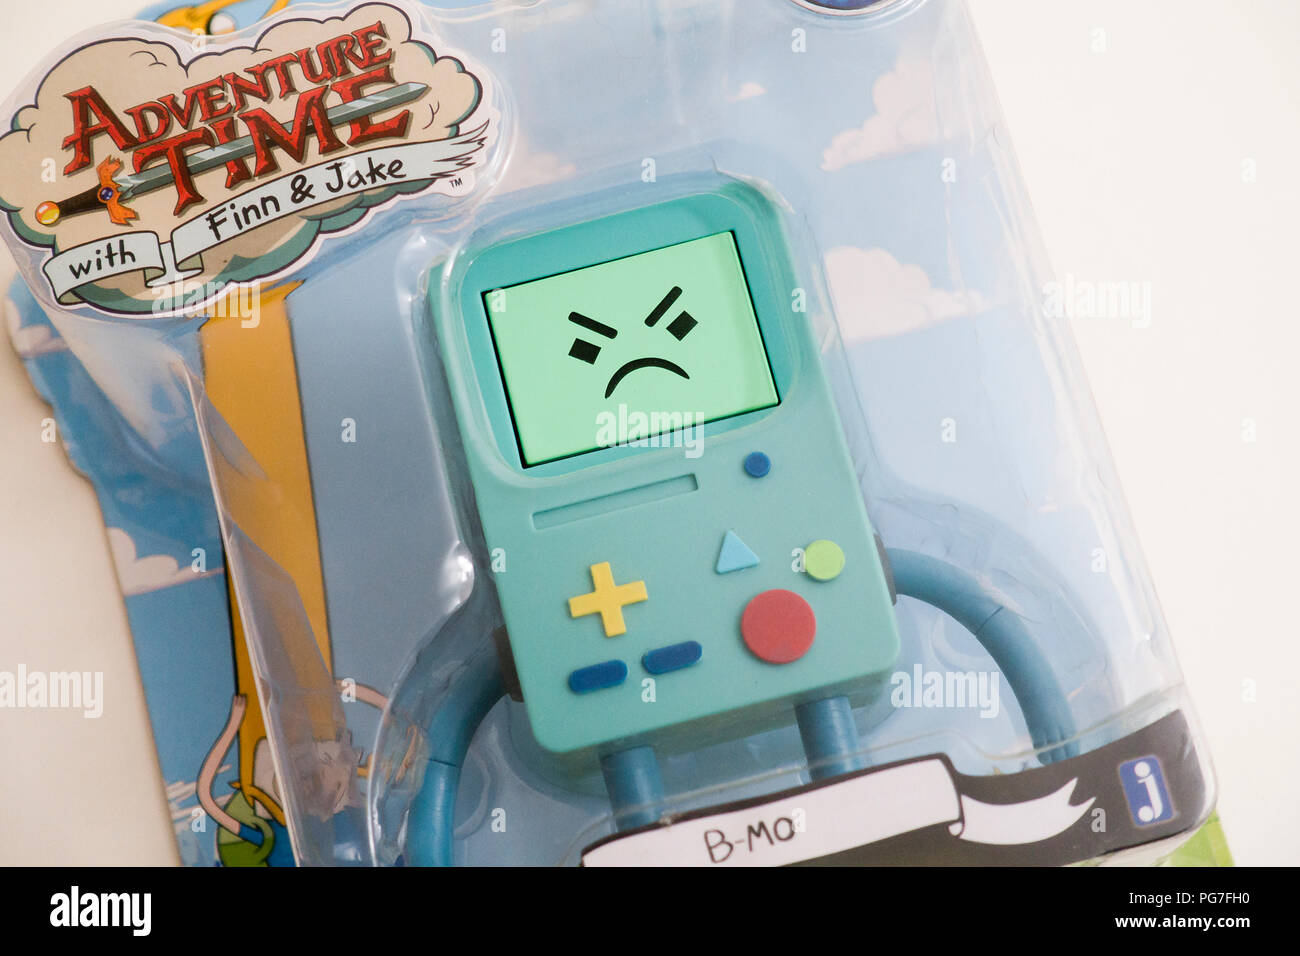 Adventure Time BMO (Beemo) toy in package - USA Stock Photo